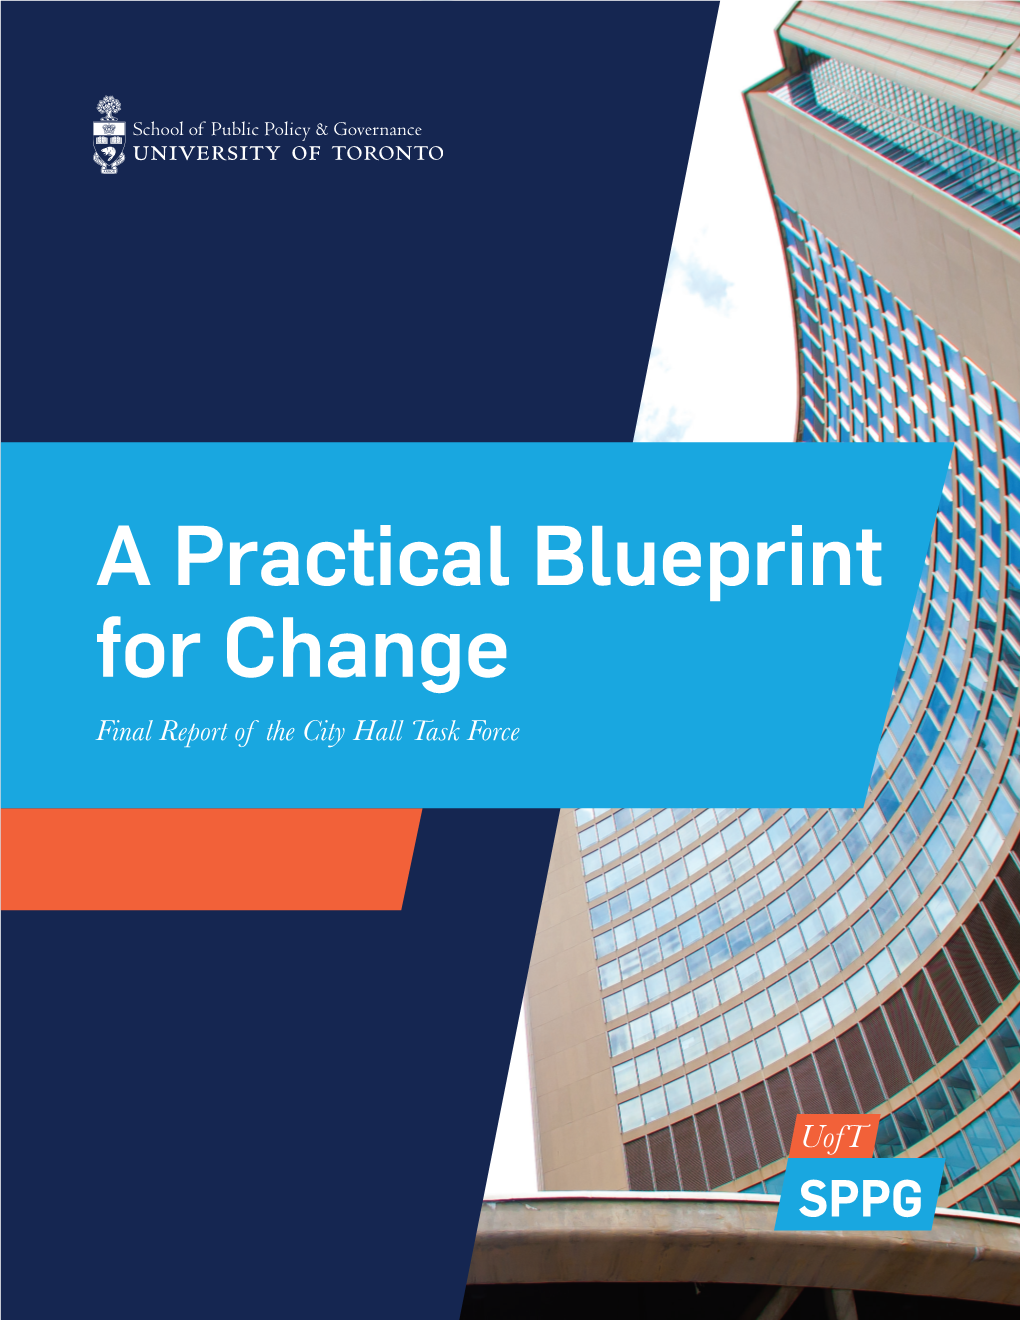 A Practical Blueprint for Change Final Report of the City Hall Task Force